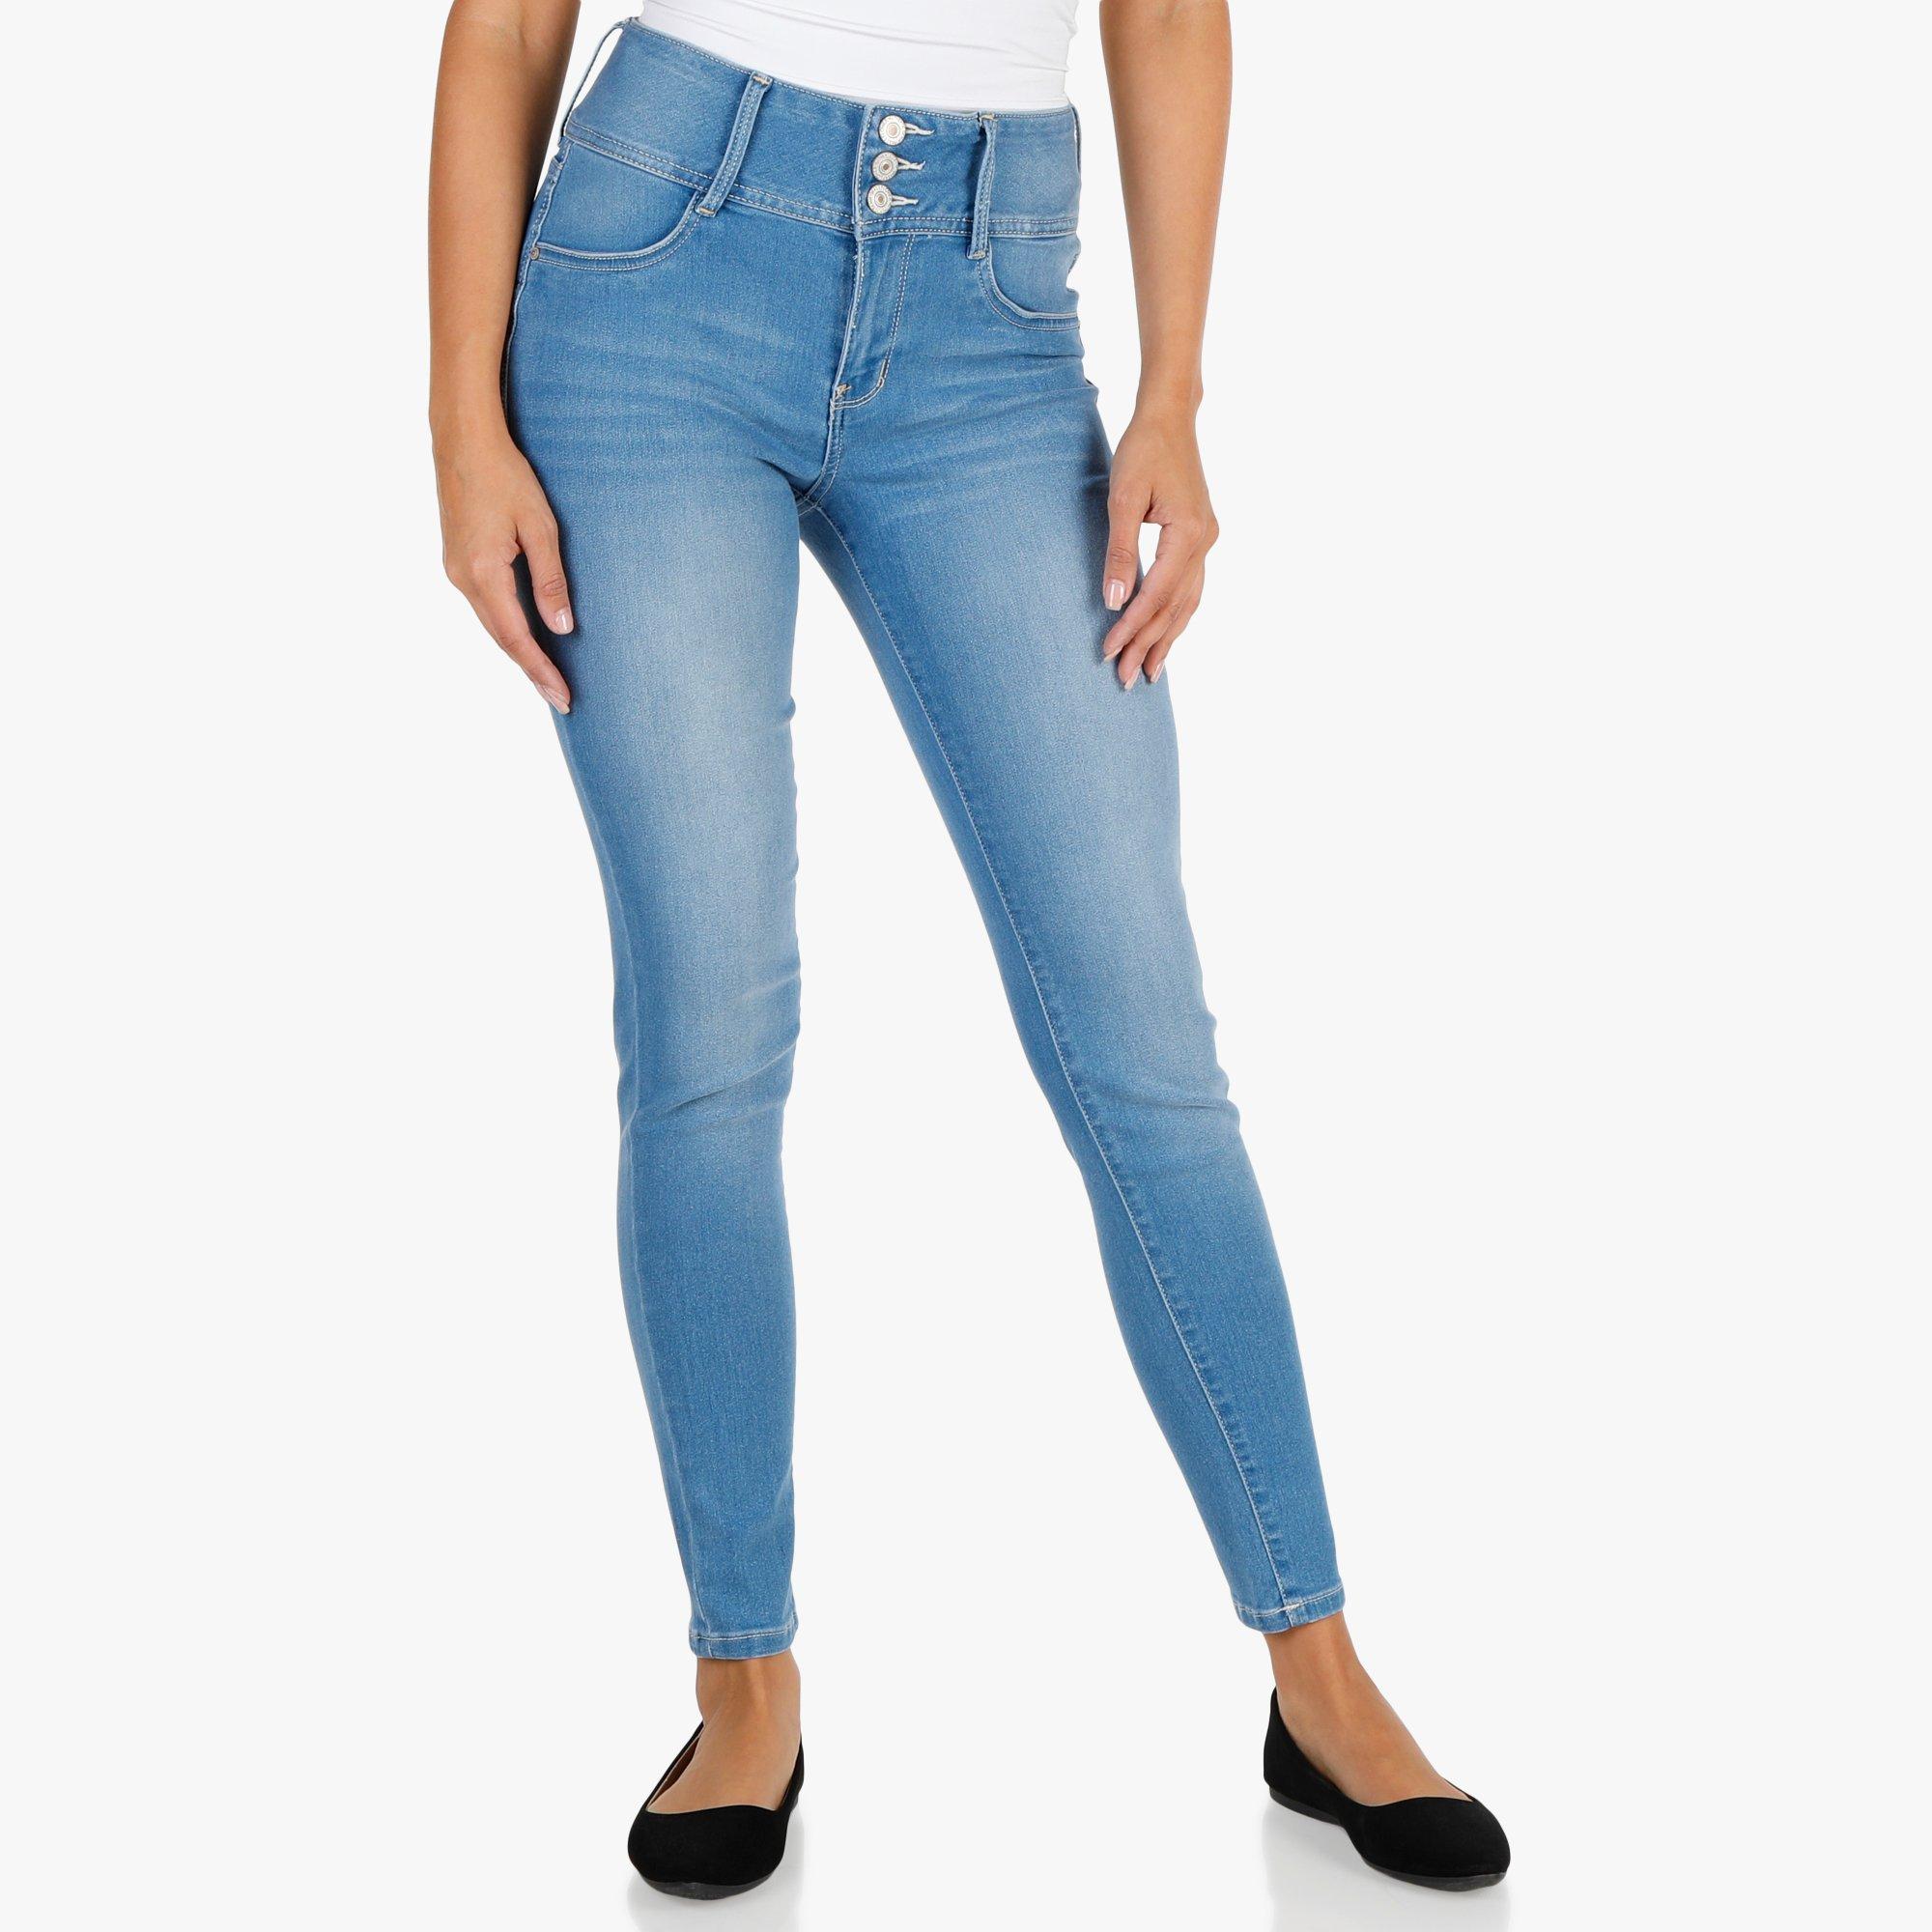 3 button skinny jeans